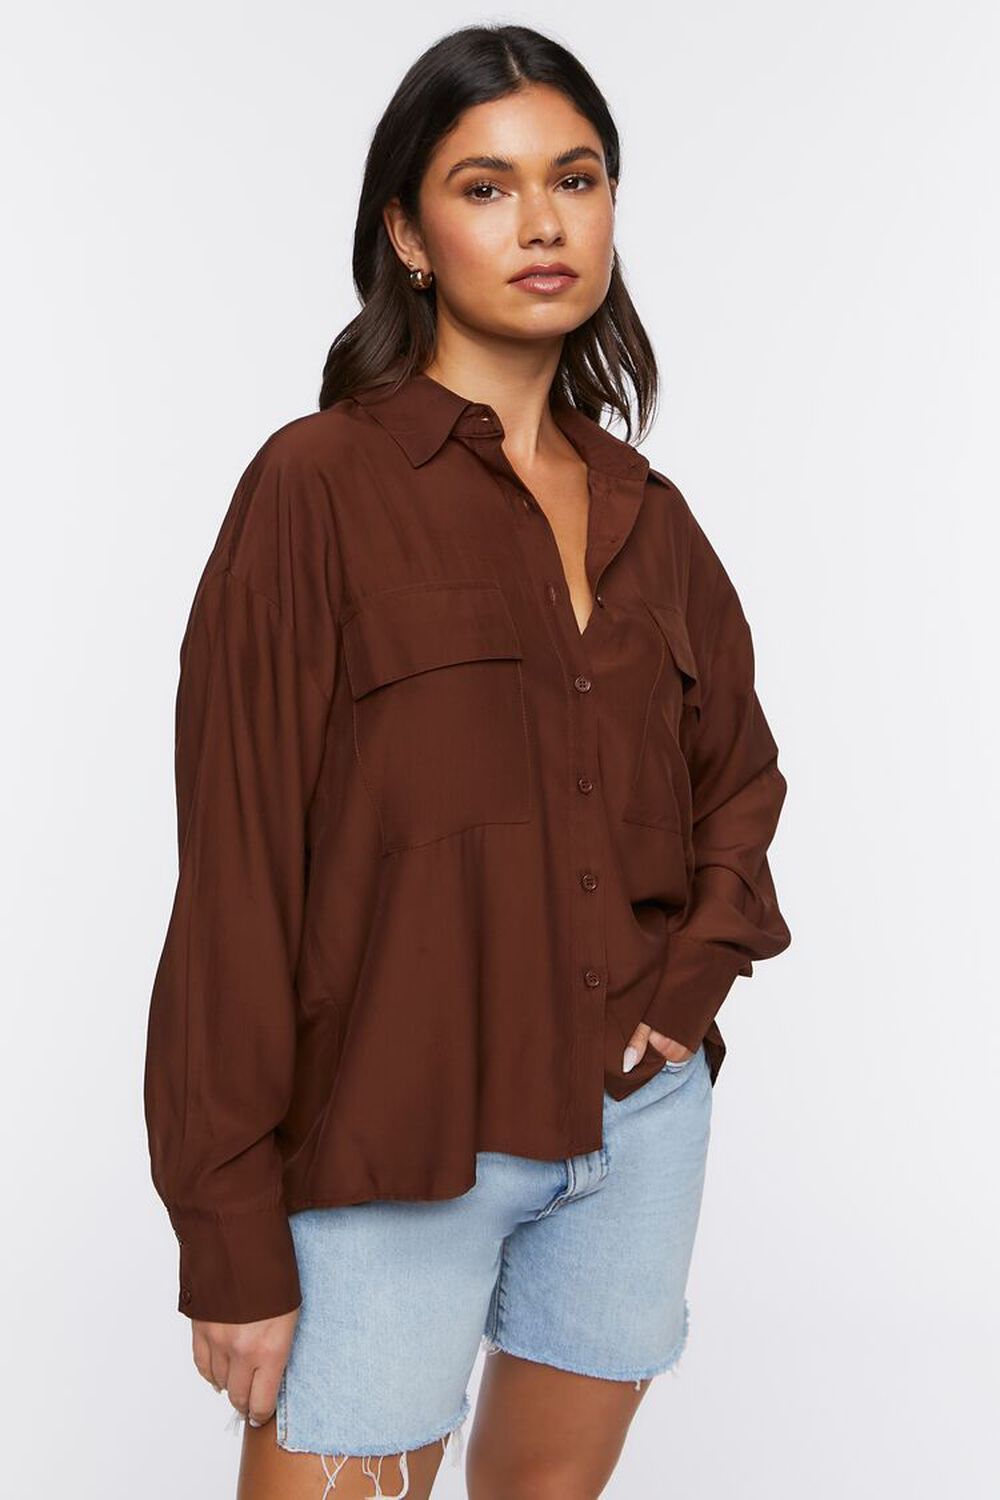 BROWN High-Low Buttoned Shirt, image 1